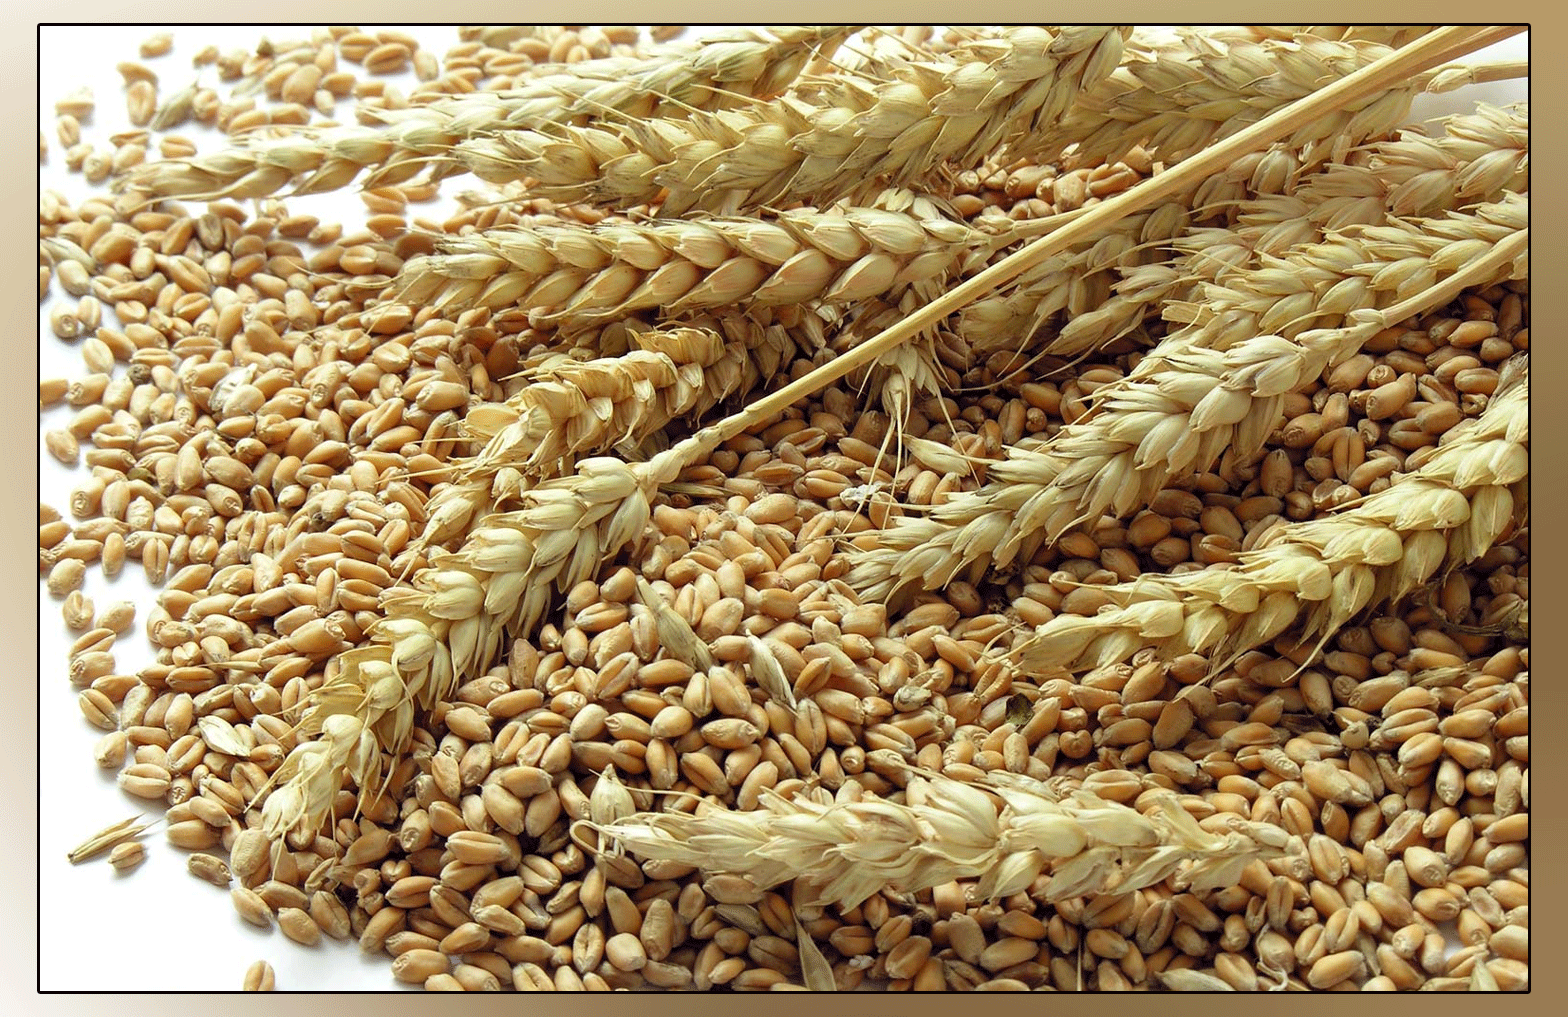 The decision to fix the per capita price of wheat in Punjab at 1800 is anti-farmer: Sindh Agriculture Minister